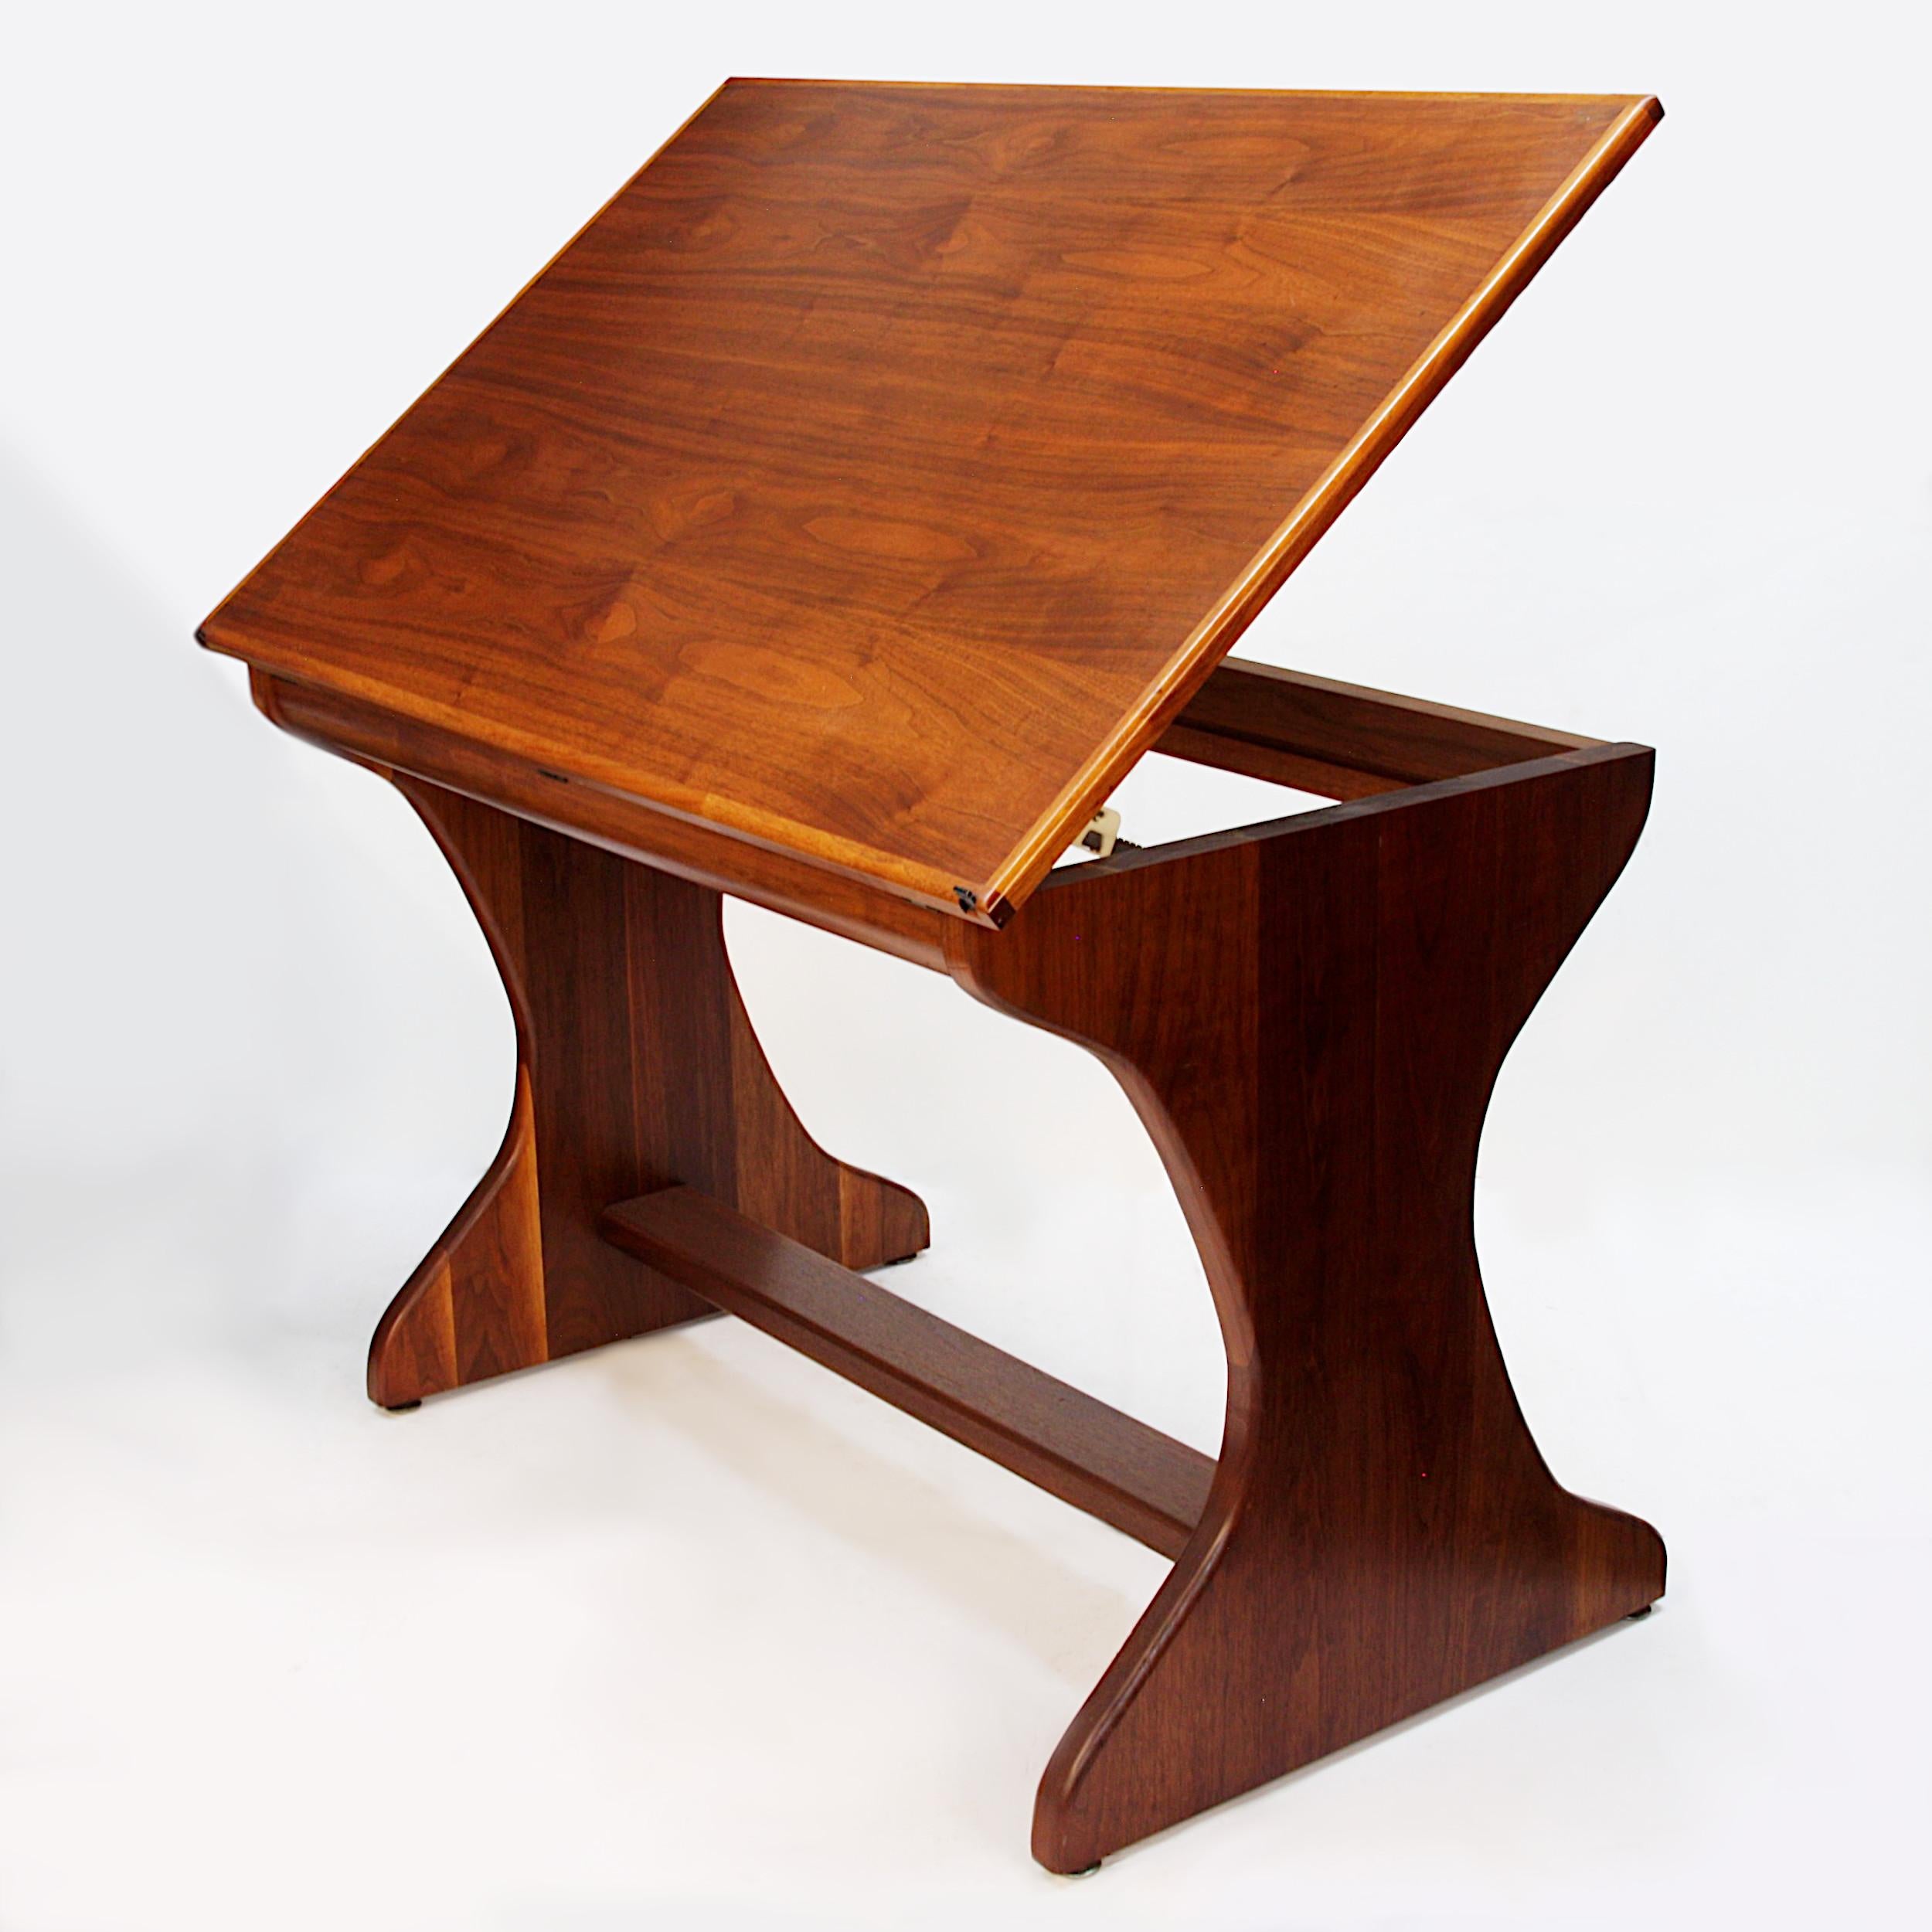 Wonderful handcrafted drafting table in the Studio Craft style. Table features a sculpted laminated walnut base with a fully-adjustable, tilting walnut-veneer top. It is not often you come across a drafting table done in the Studio-Craft style and